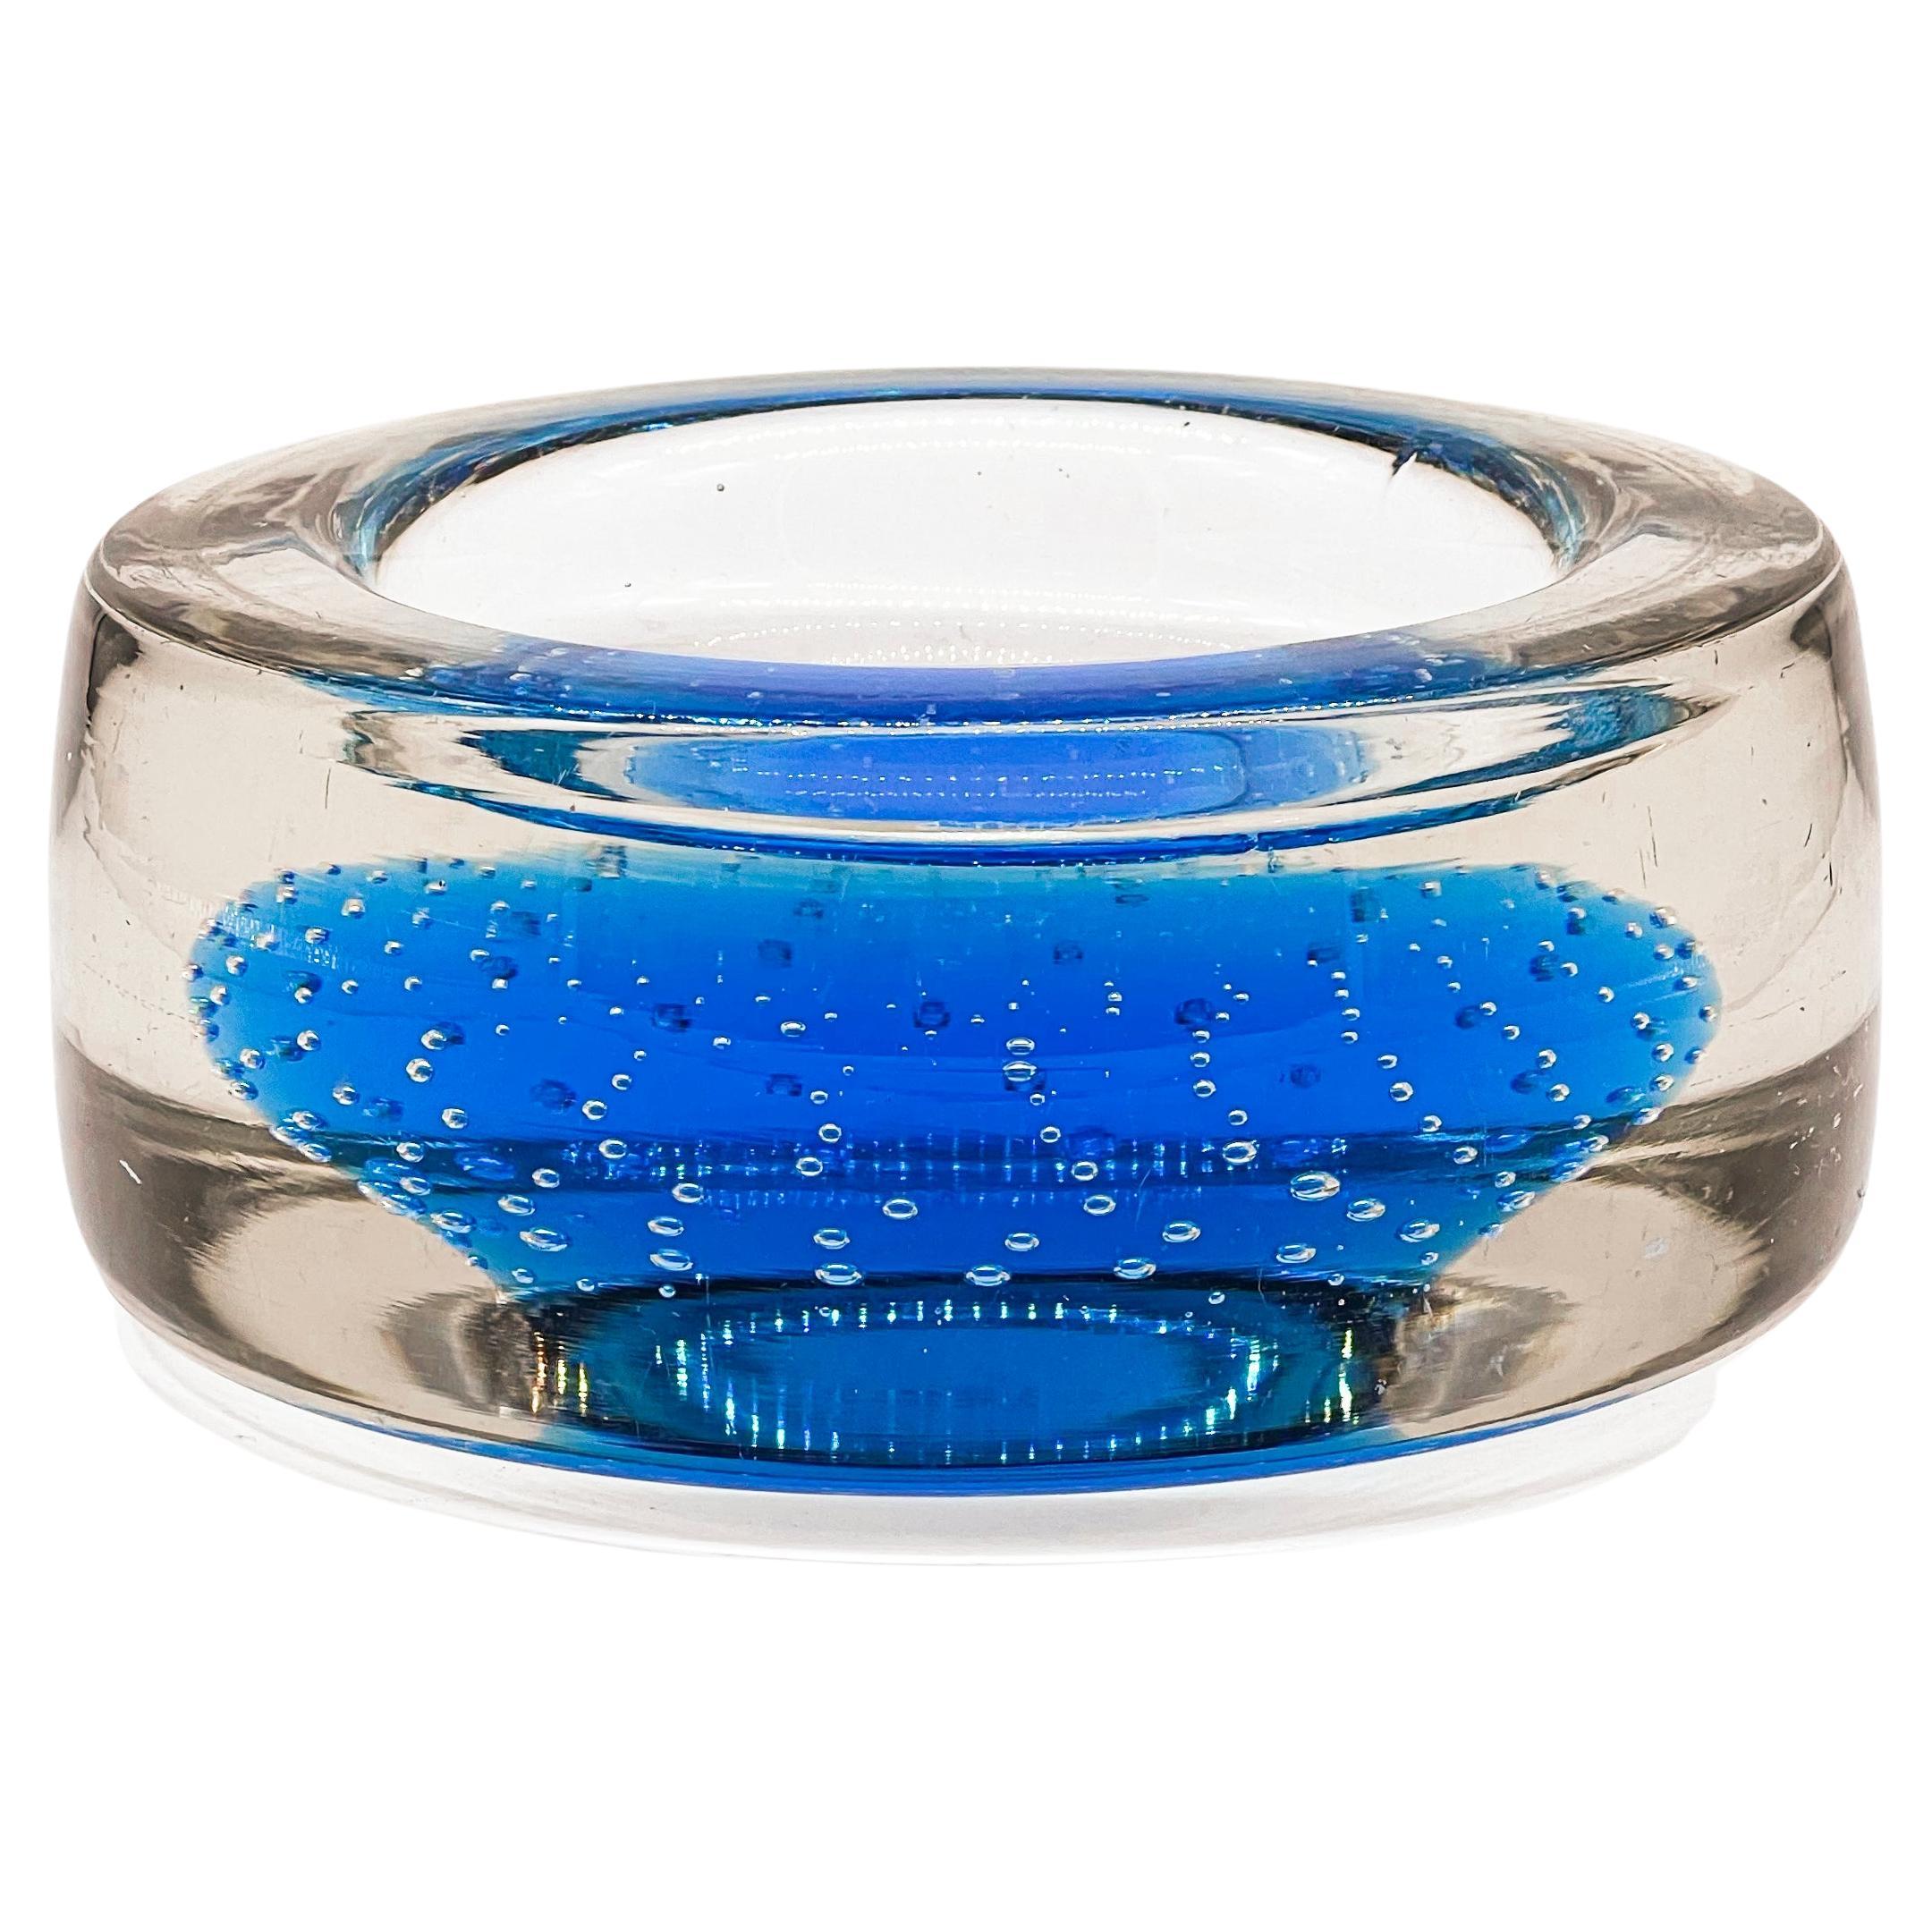 Seguso bowl, blue and clear Sommerso Murano glass, decorative sculpture